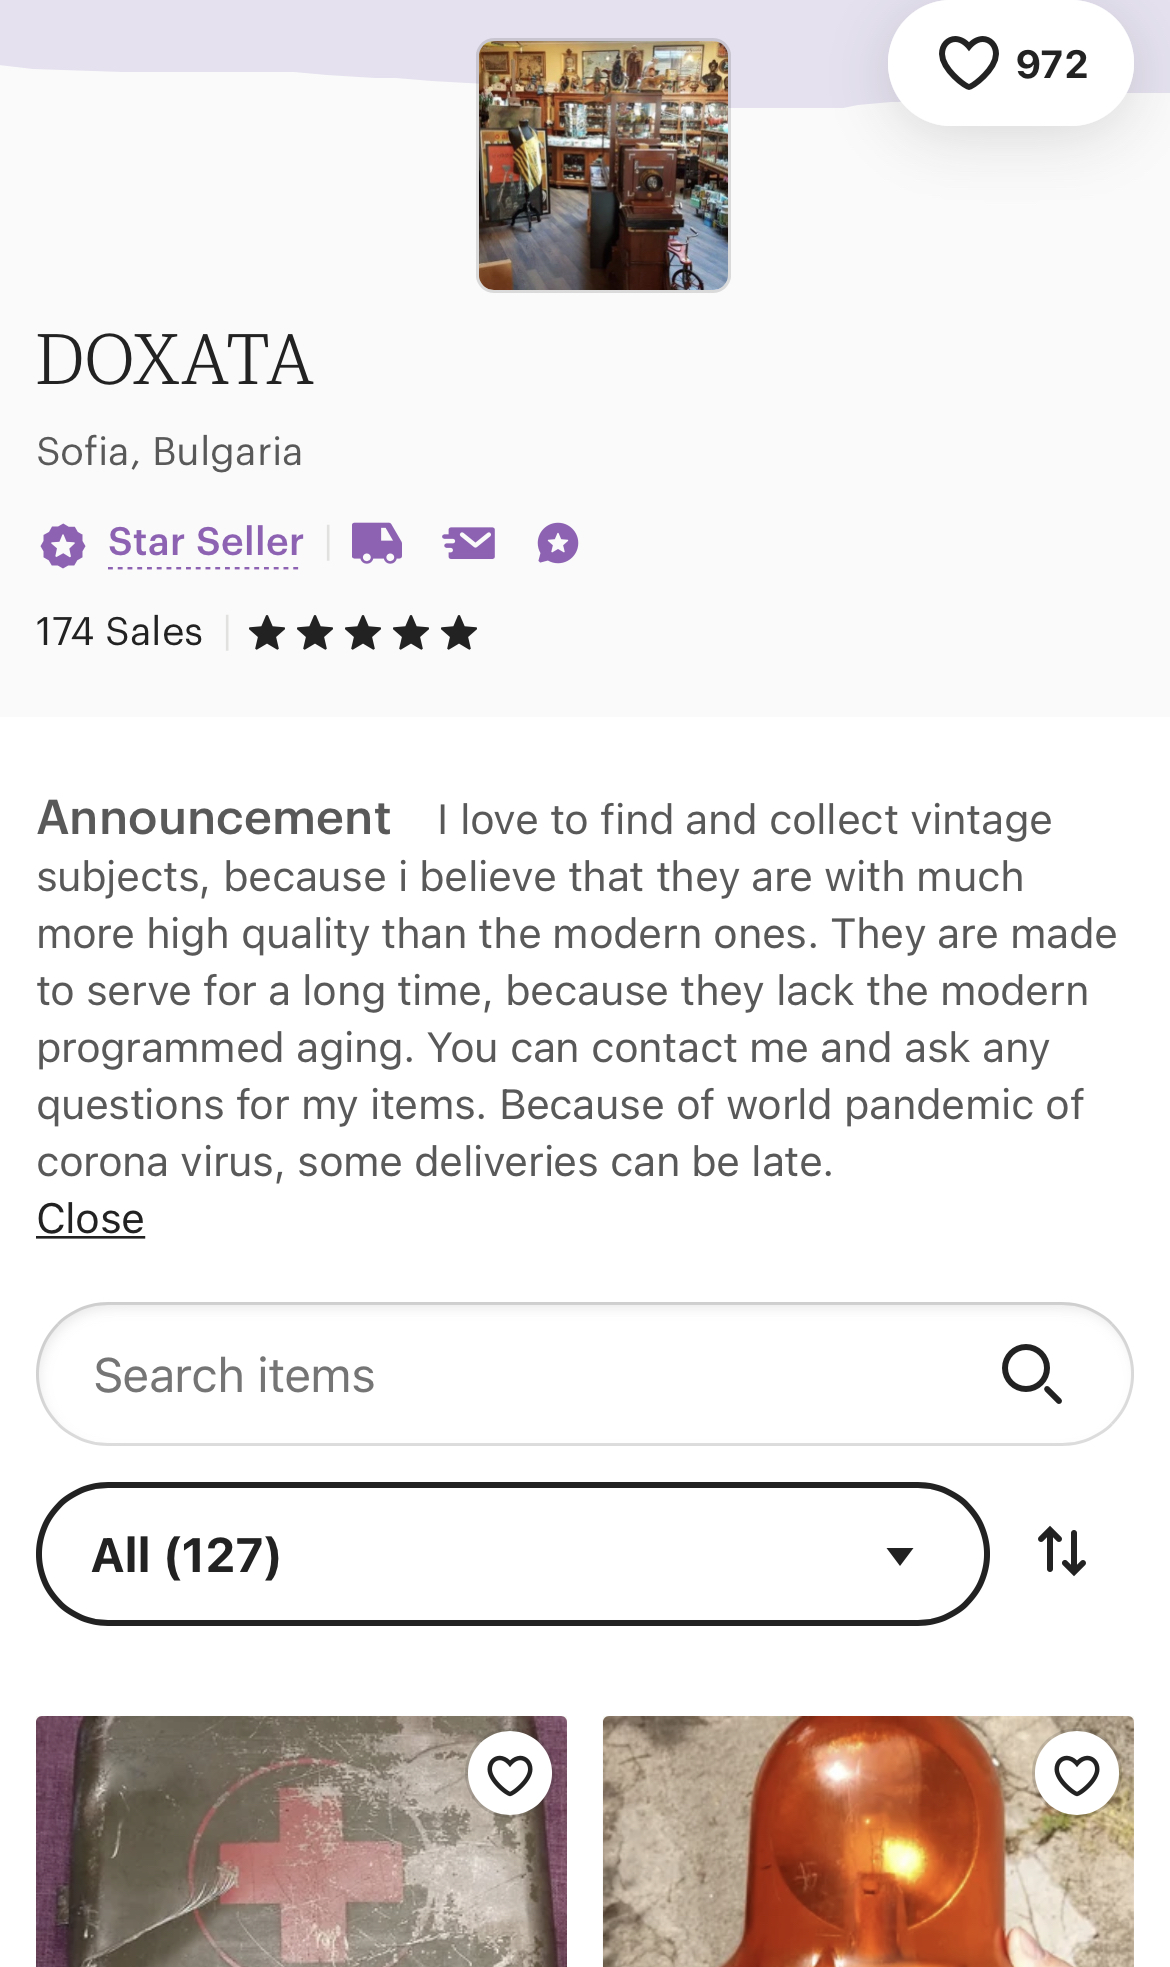 DOXATA on Etsy is a Scammer, Beware